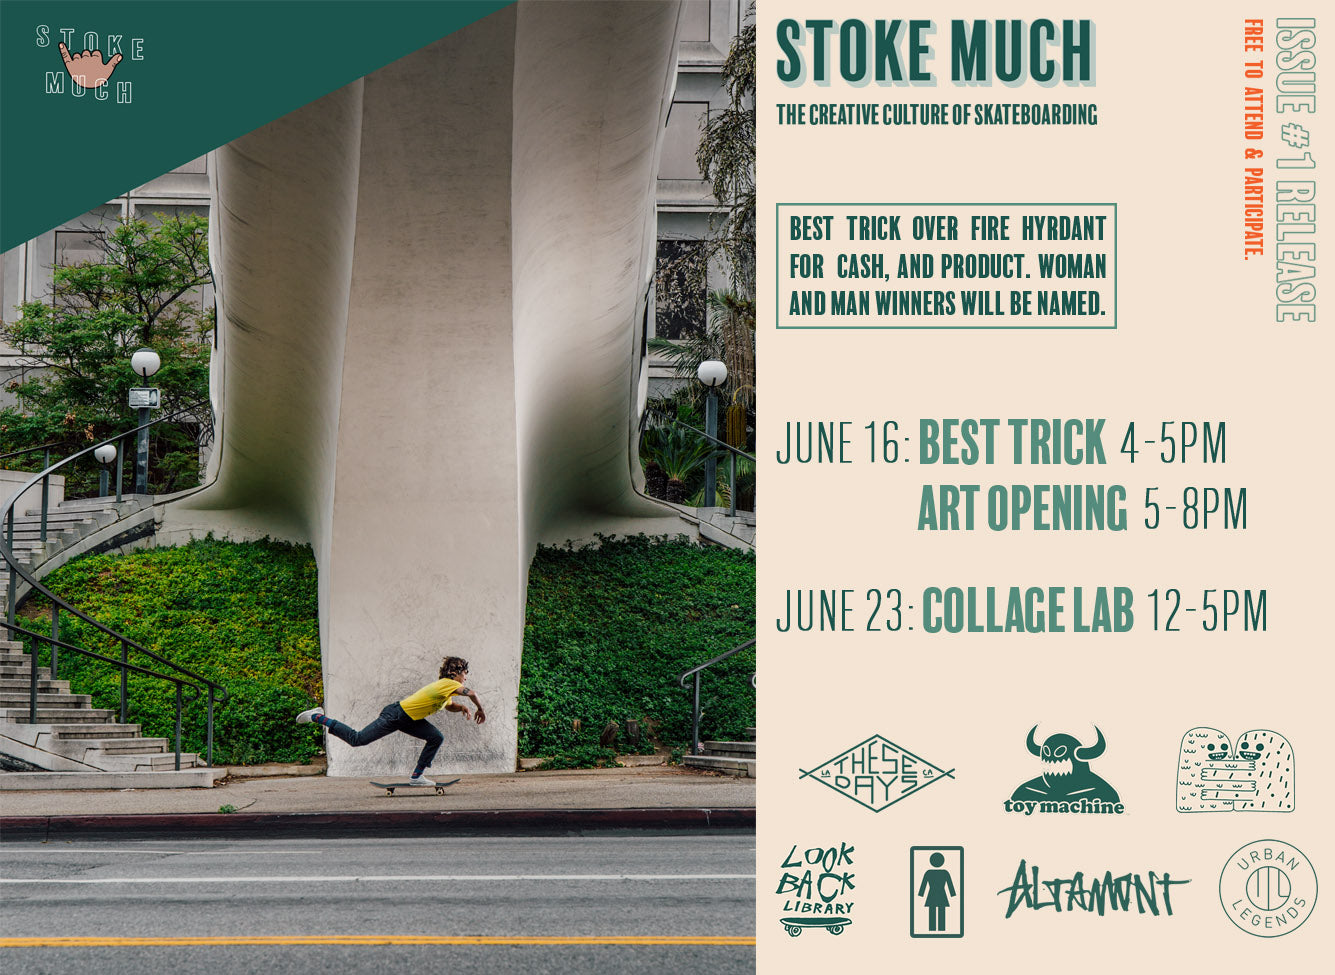 STOKE MUCH | The Creative Culture of Skateboarding